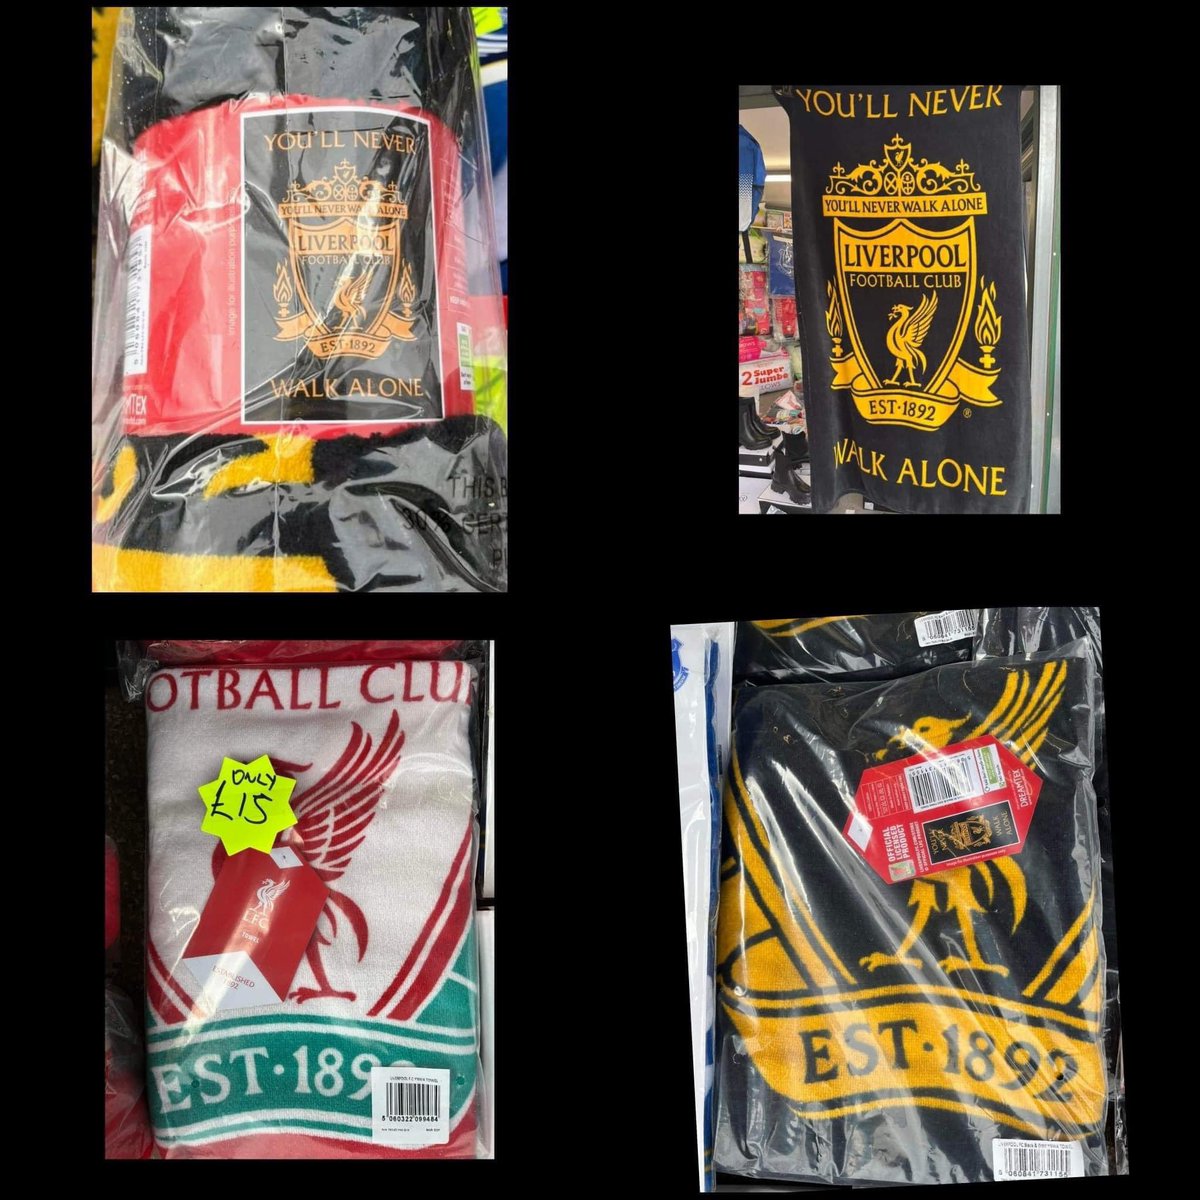 We are back open tomorrow and new @Everton @LFC beach towels and character towels in stock all official stock at great prices in @Huytonvilcentre @Stevo_Stonko @angiesliverpool @BLUENOSEBOB1878 @willo_ian @LyndseyCritchle @AllenWeso6 @pbucko62 @HaddleyTheresa @needswittyname